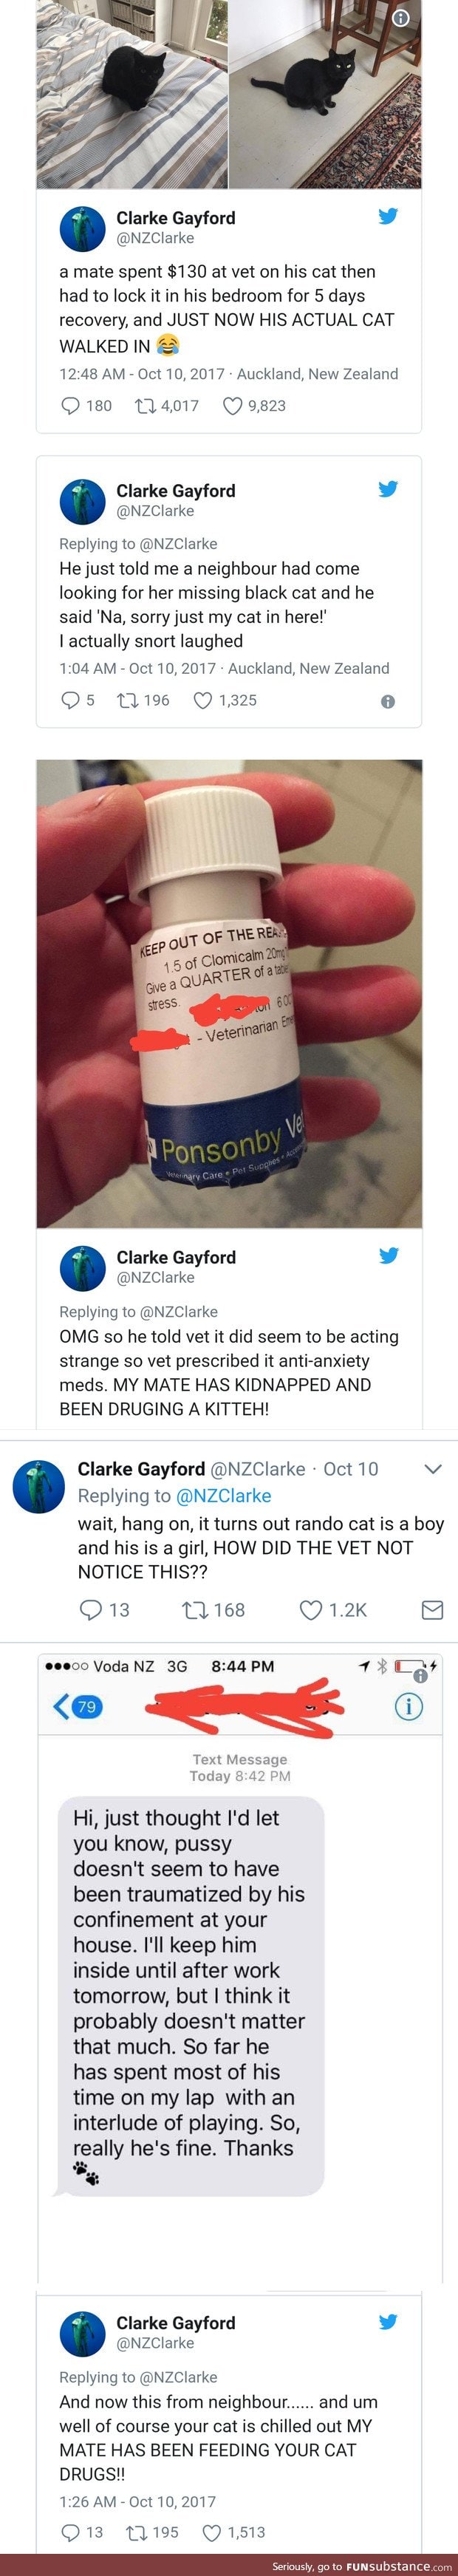 Man mistakes his neighbors cat for his own and gets it diagnosed